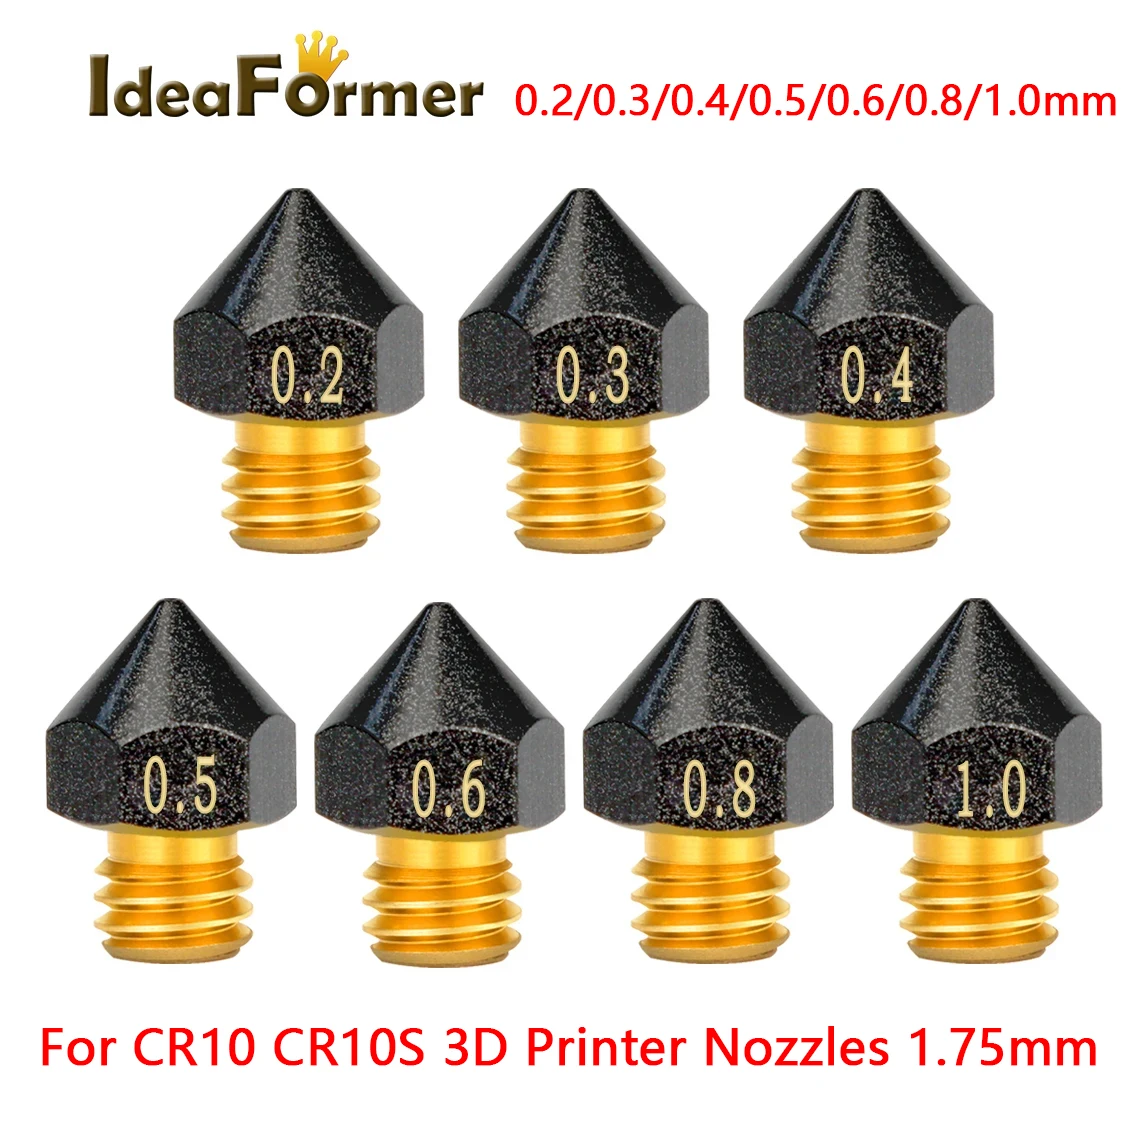 

1/2/5Pcs MK8 Nozzle PTFE Coated New Large Head Brass Nozzles For CR10 CR10 Pro CR10S Extruder Print Head 3D Printer Accessories